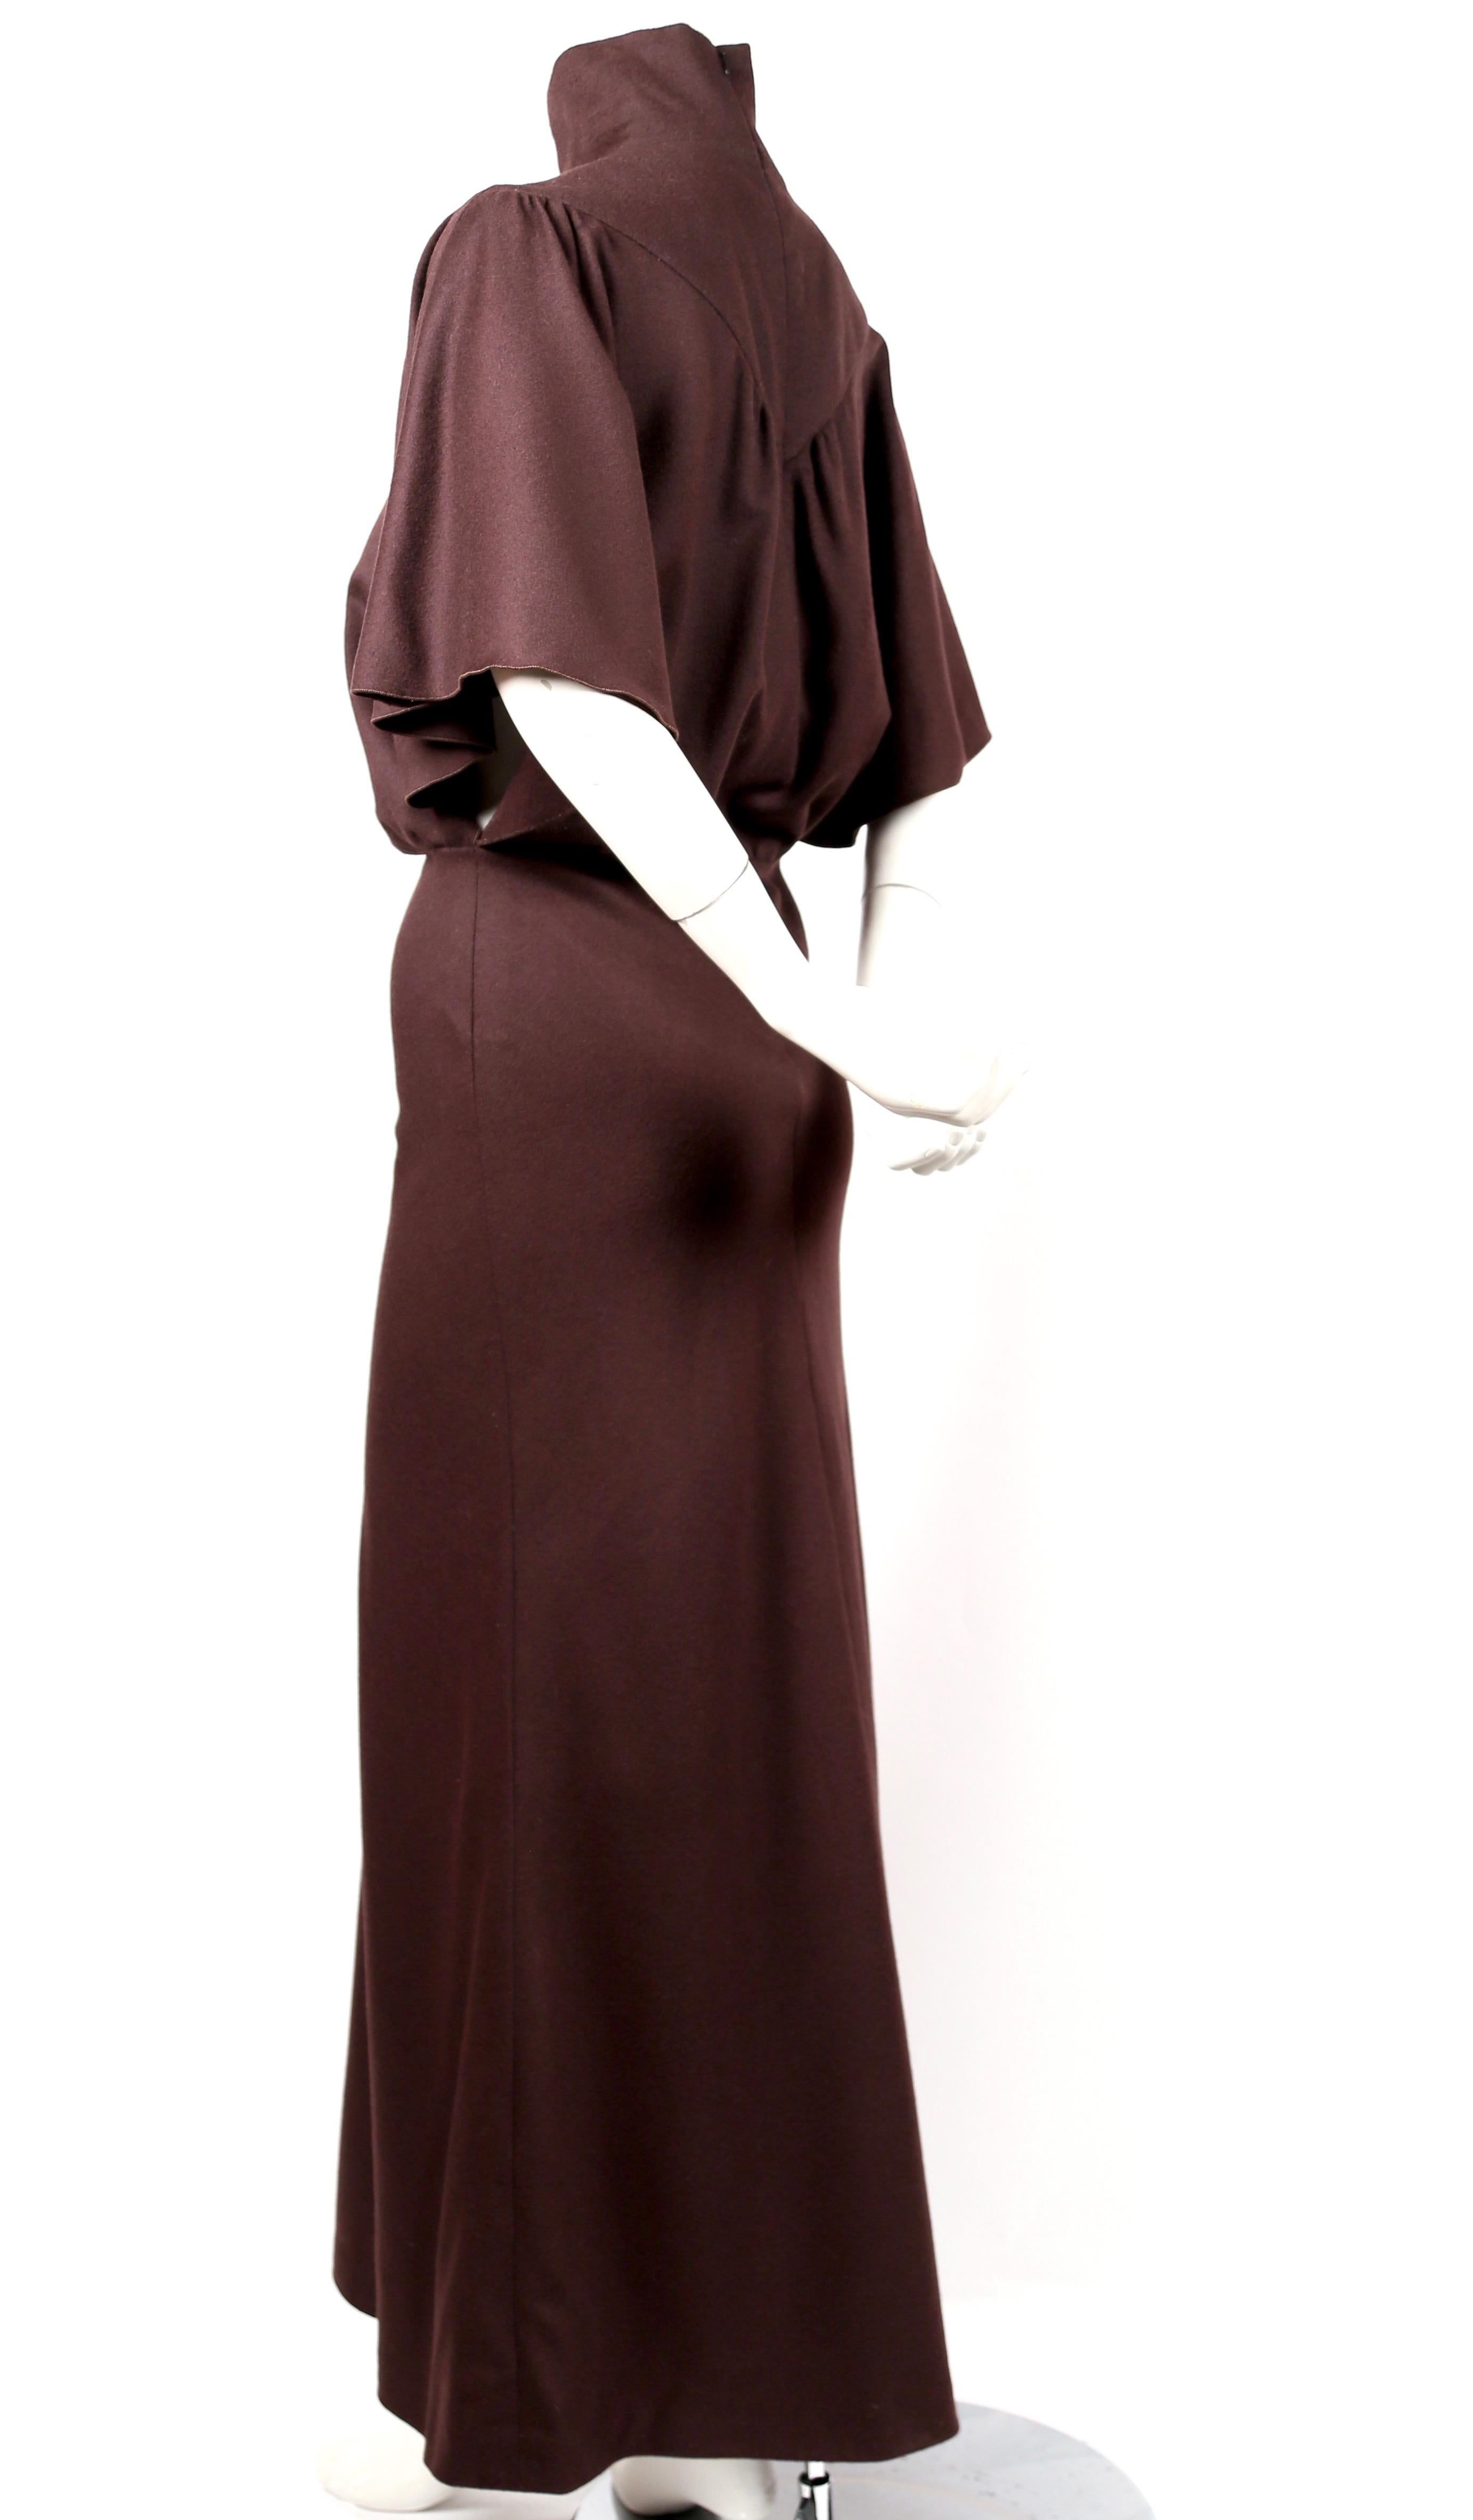 Bias-cut, brown wool dress with flutter sleeves designed by Nicolas Ghesquiere for Balenciaga fall 1998. This is the actual dress worn on the runway. It was given as a gift to the runway model from Nicolas Ghesquiere. No label or size because the